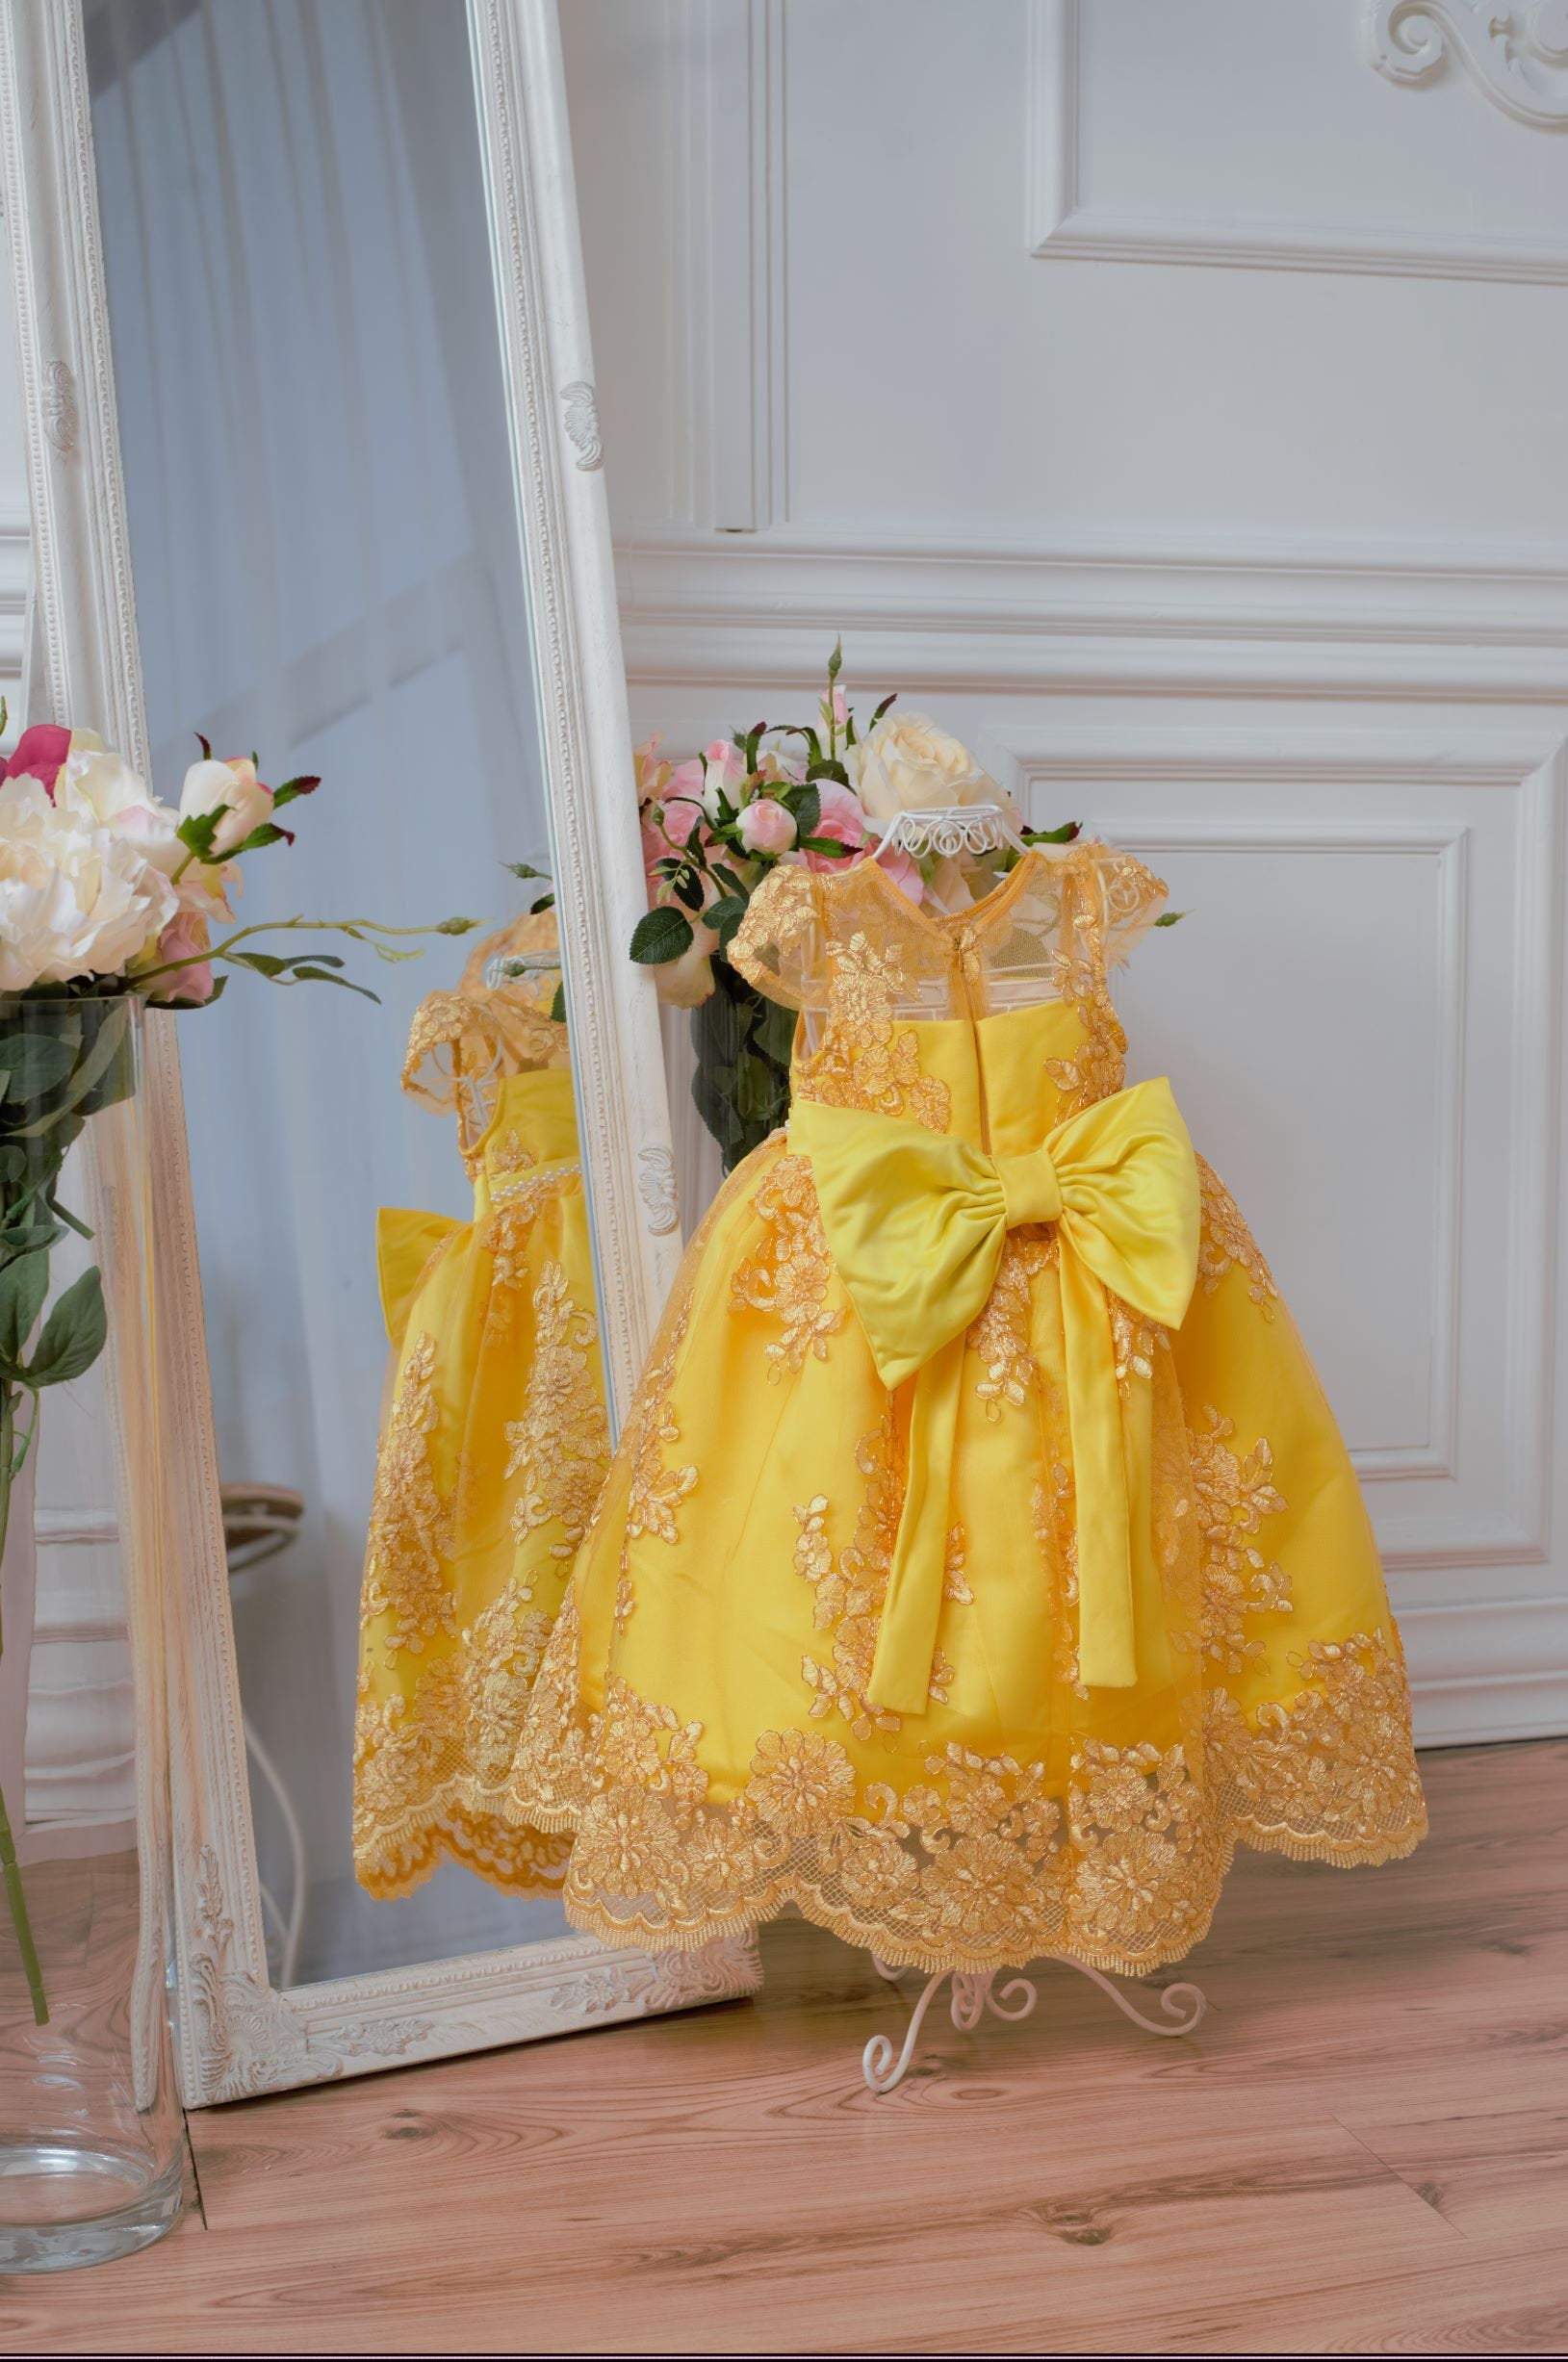 Buy Soft Yellow Dress Online for kids by BABA BABY CLOTHING - 4121987